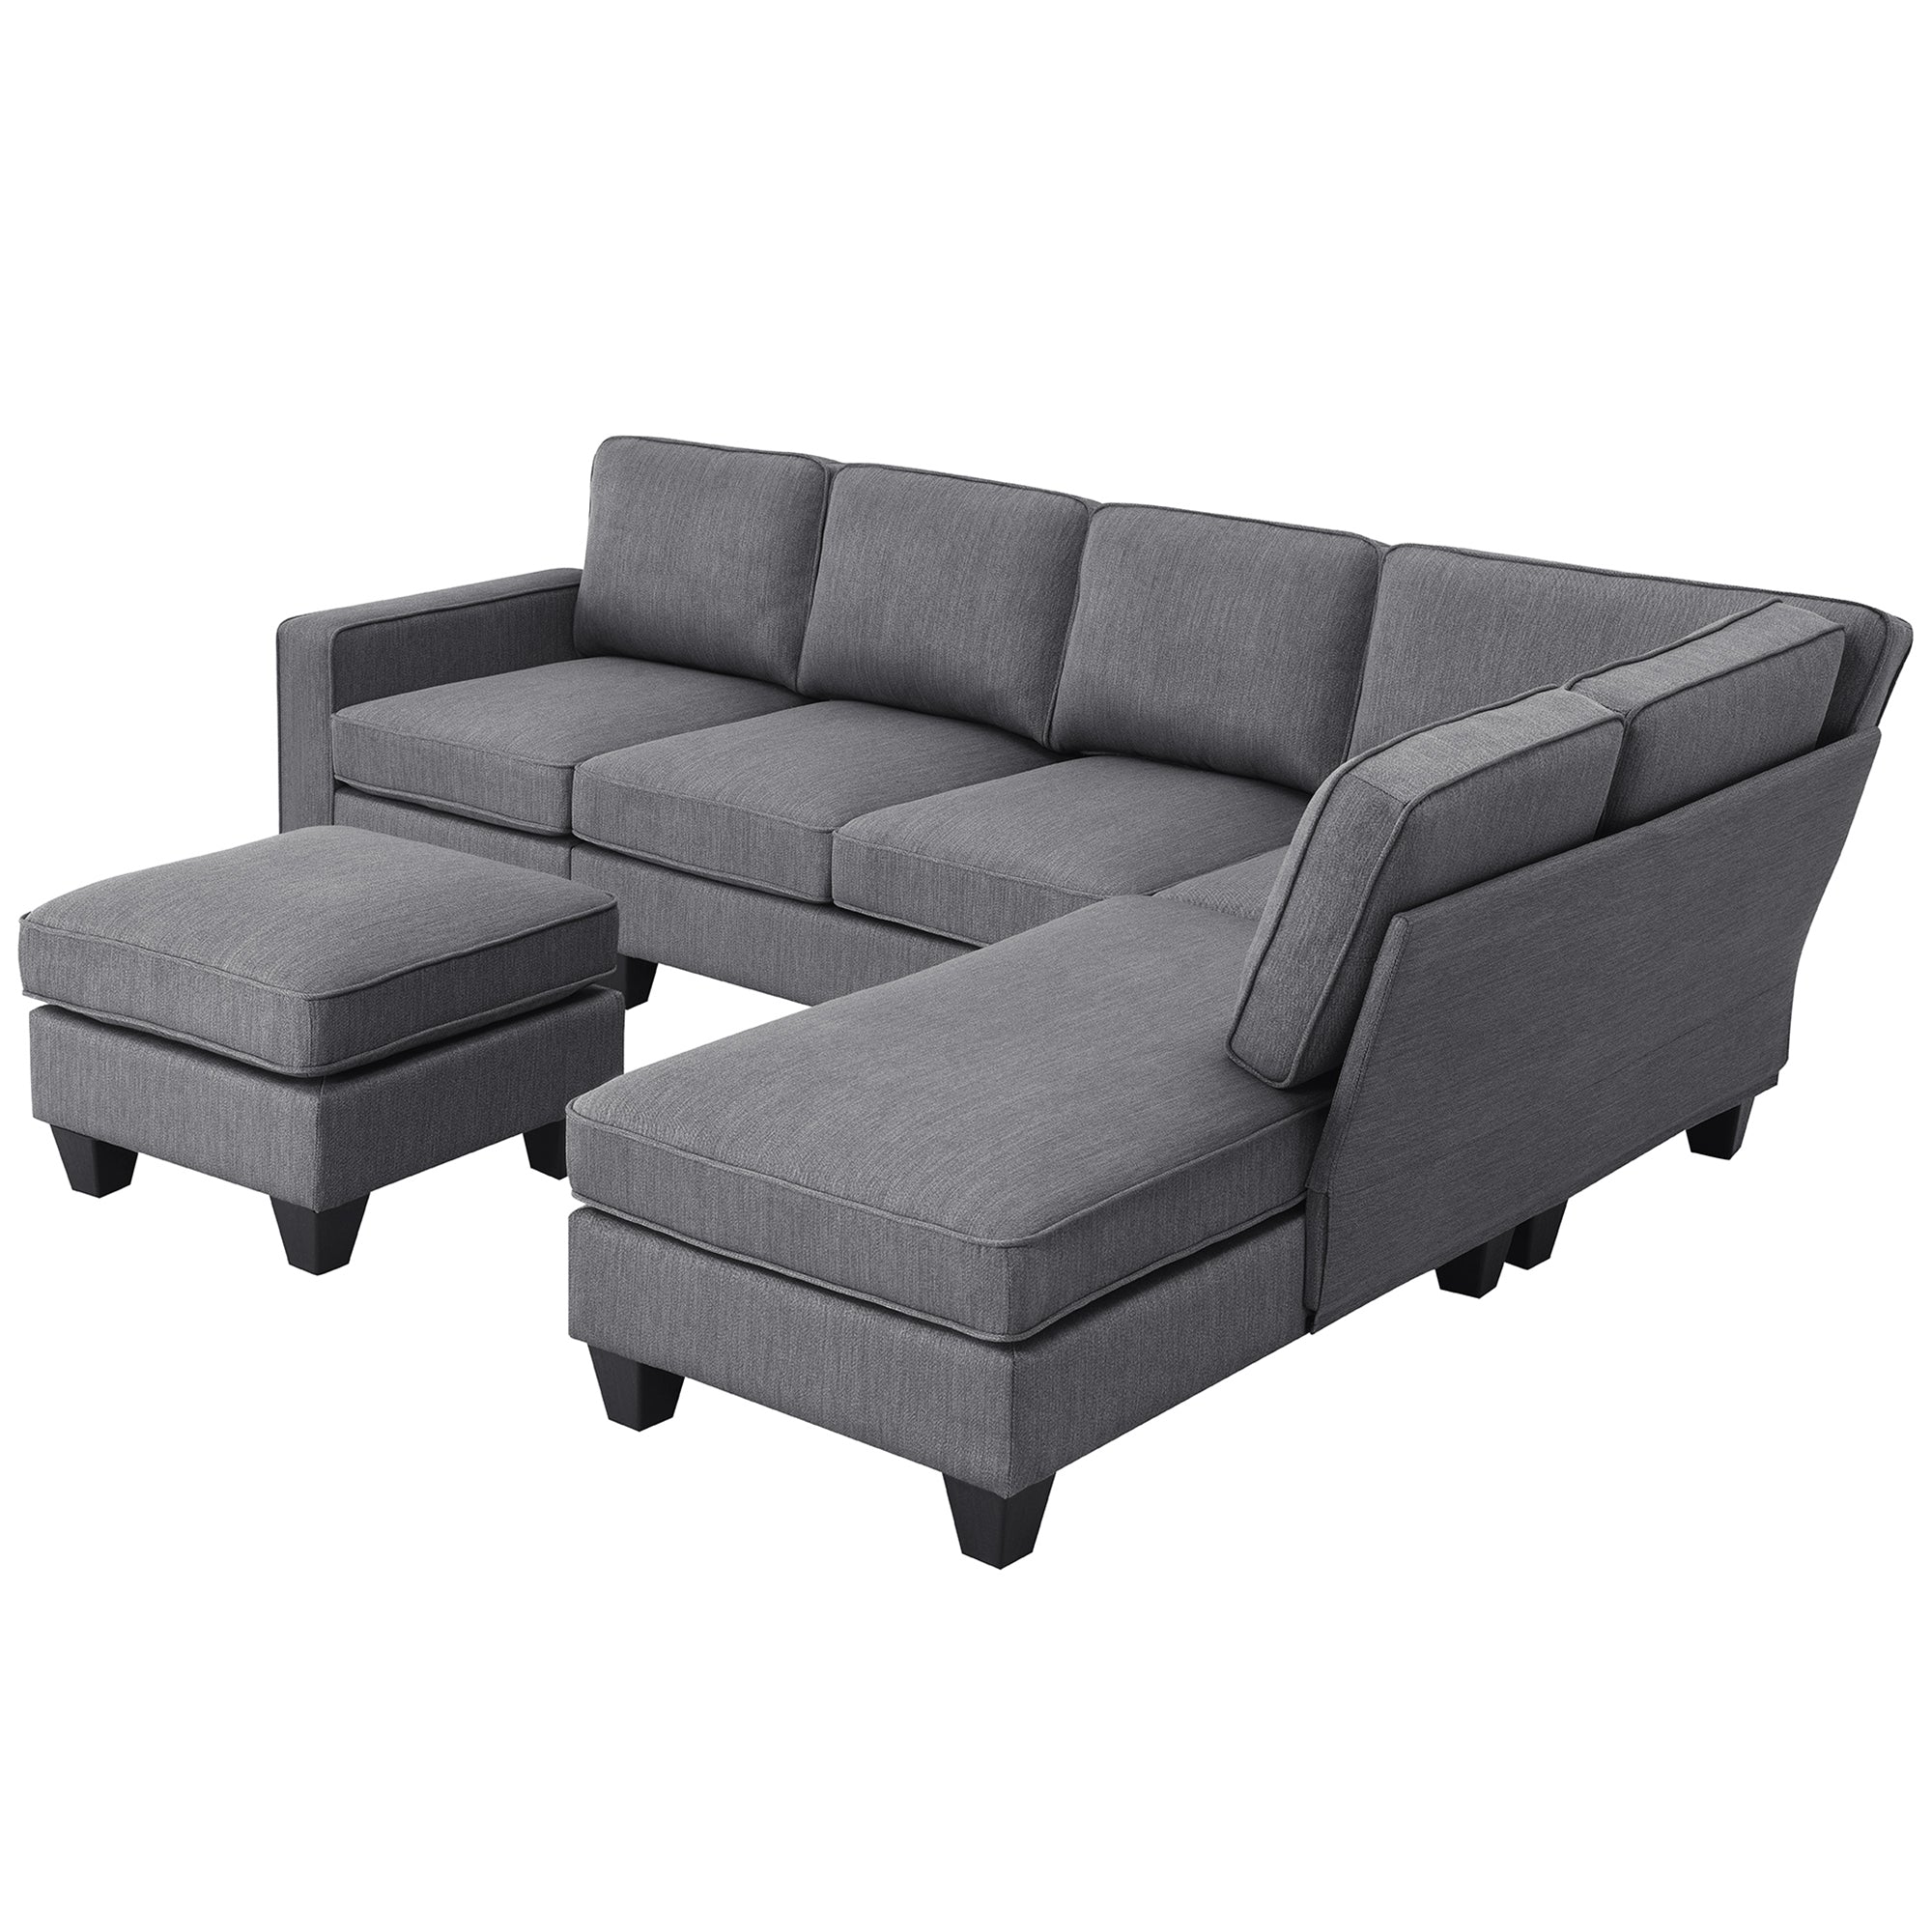 104.3*78.7" Modern L-shaped Sectional Sofa,7-seat Linen Fabric Couch Set with Chaise Lounge and Convertible Ottoman